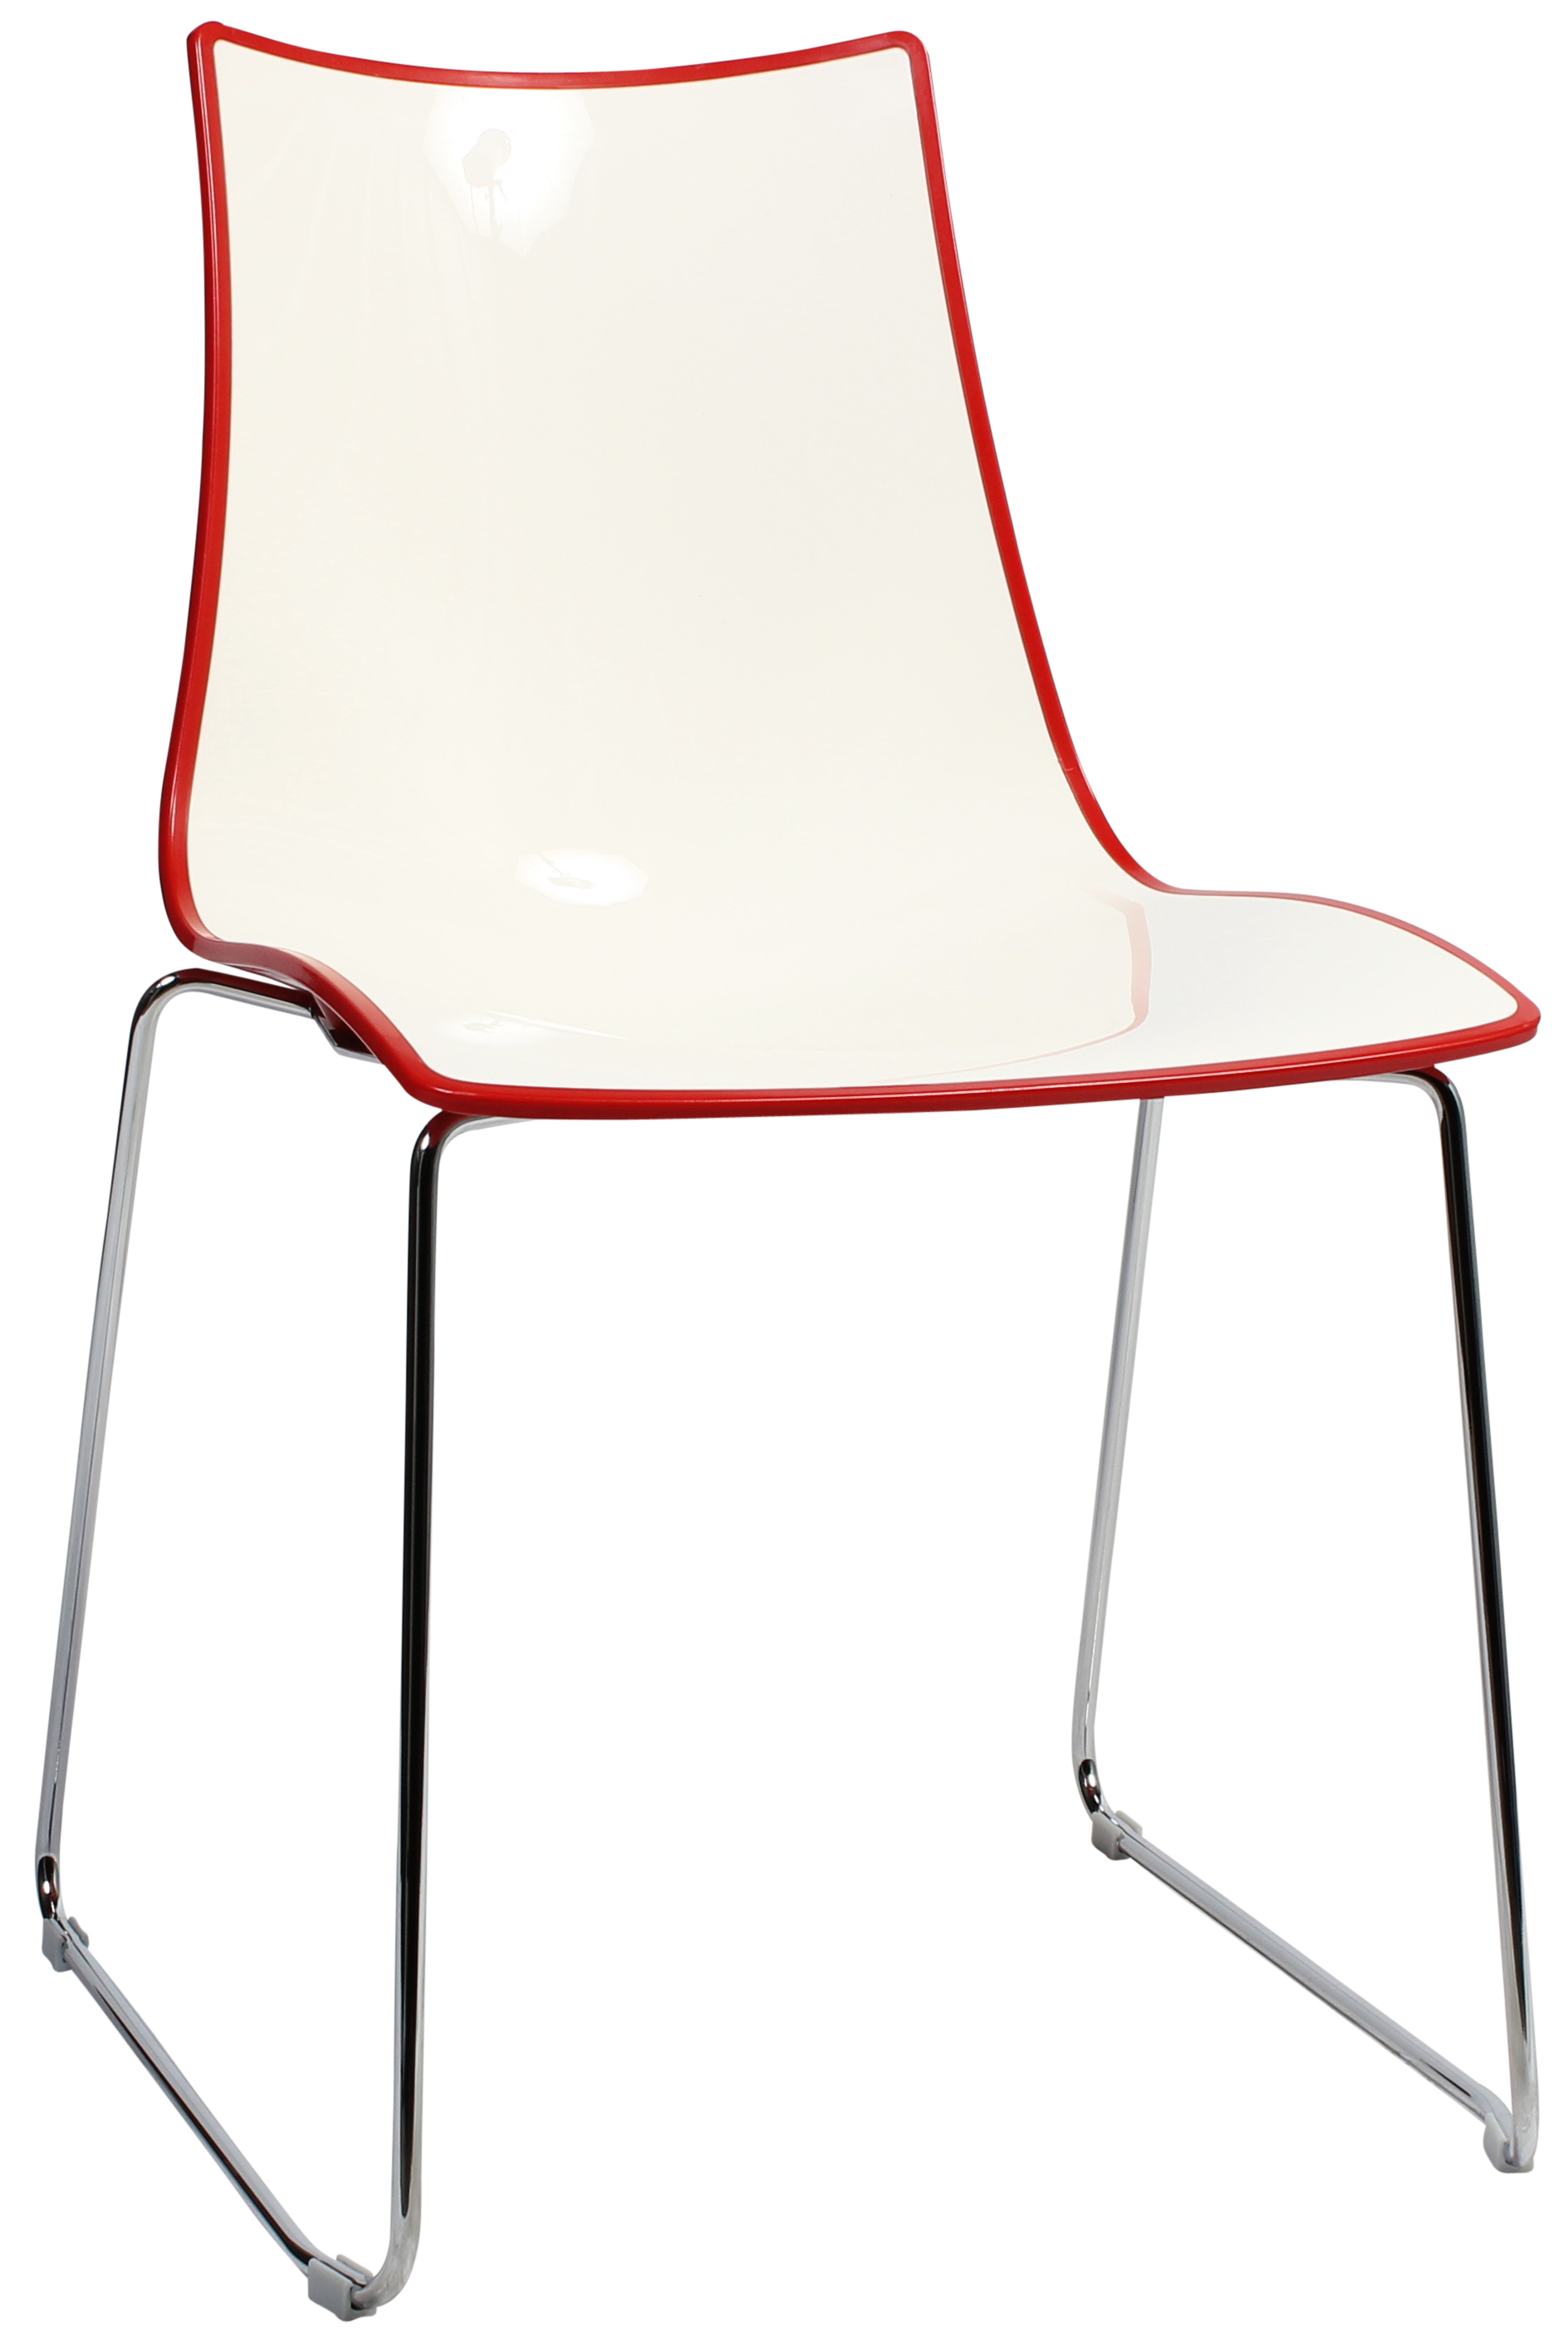 CHAIR BICOLORE SLED CHROME-RED